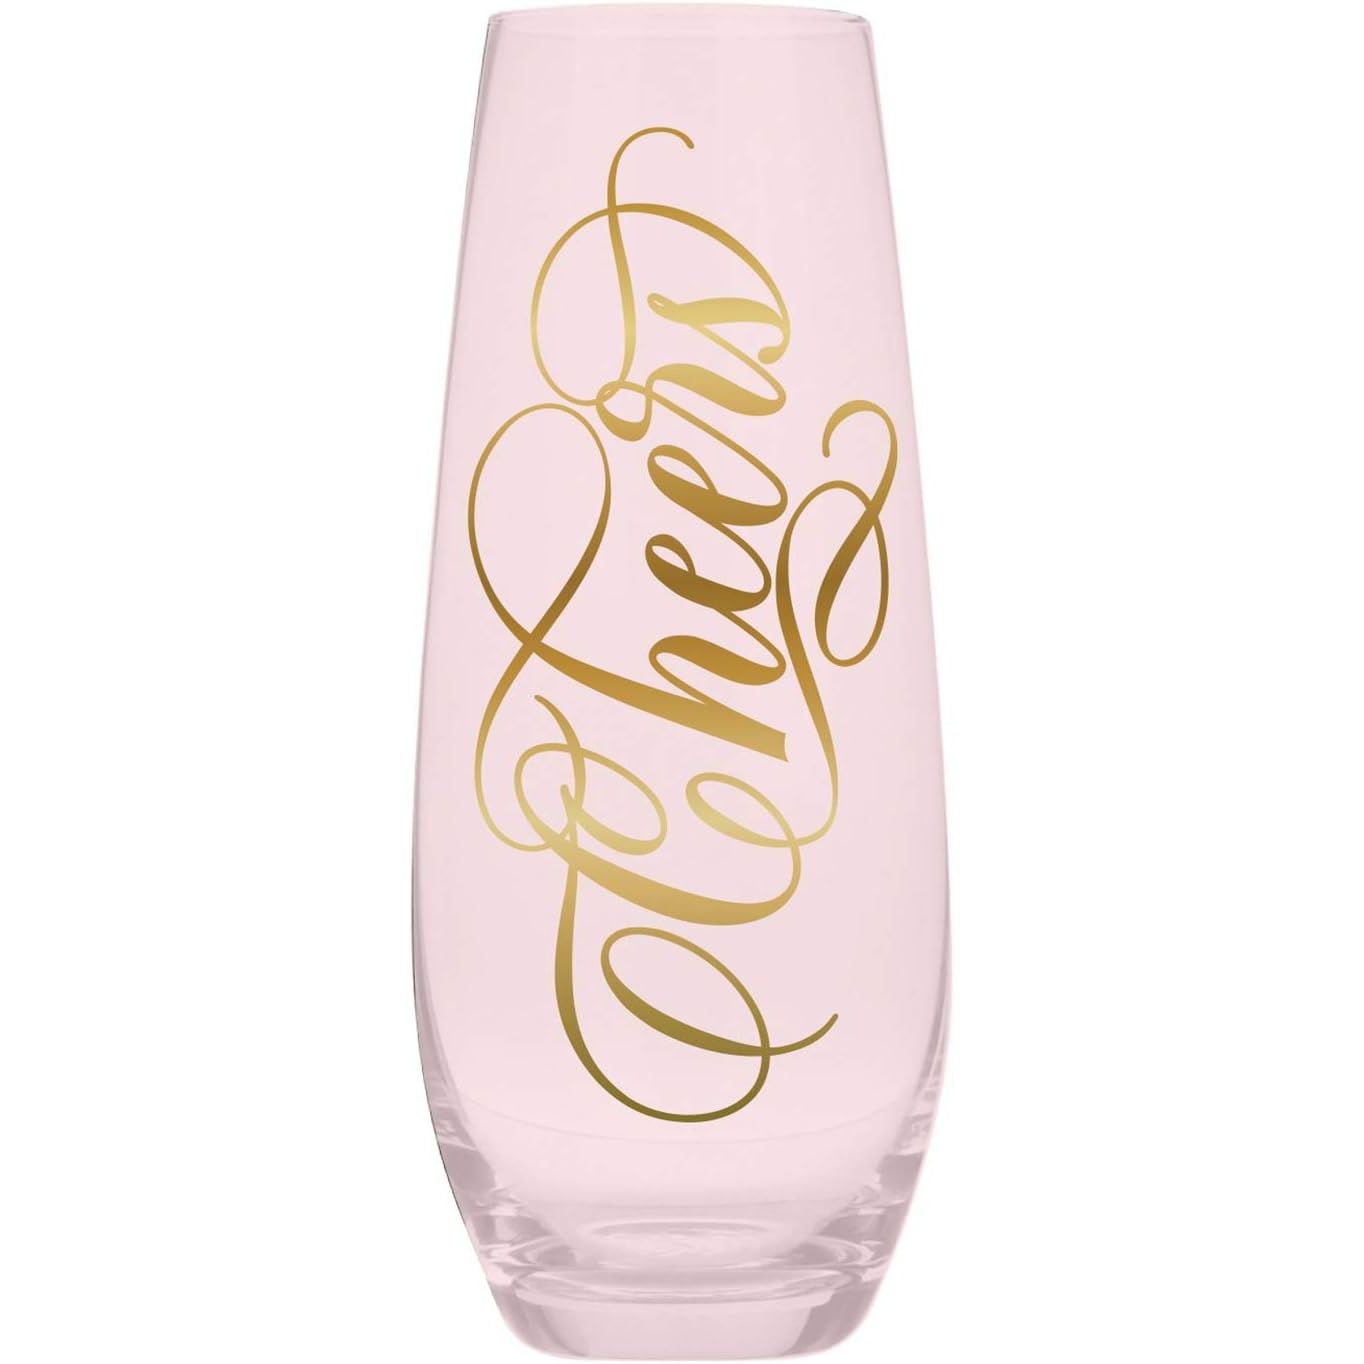 'Cheers' Stemless Champagne Glass